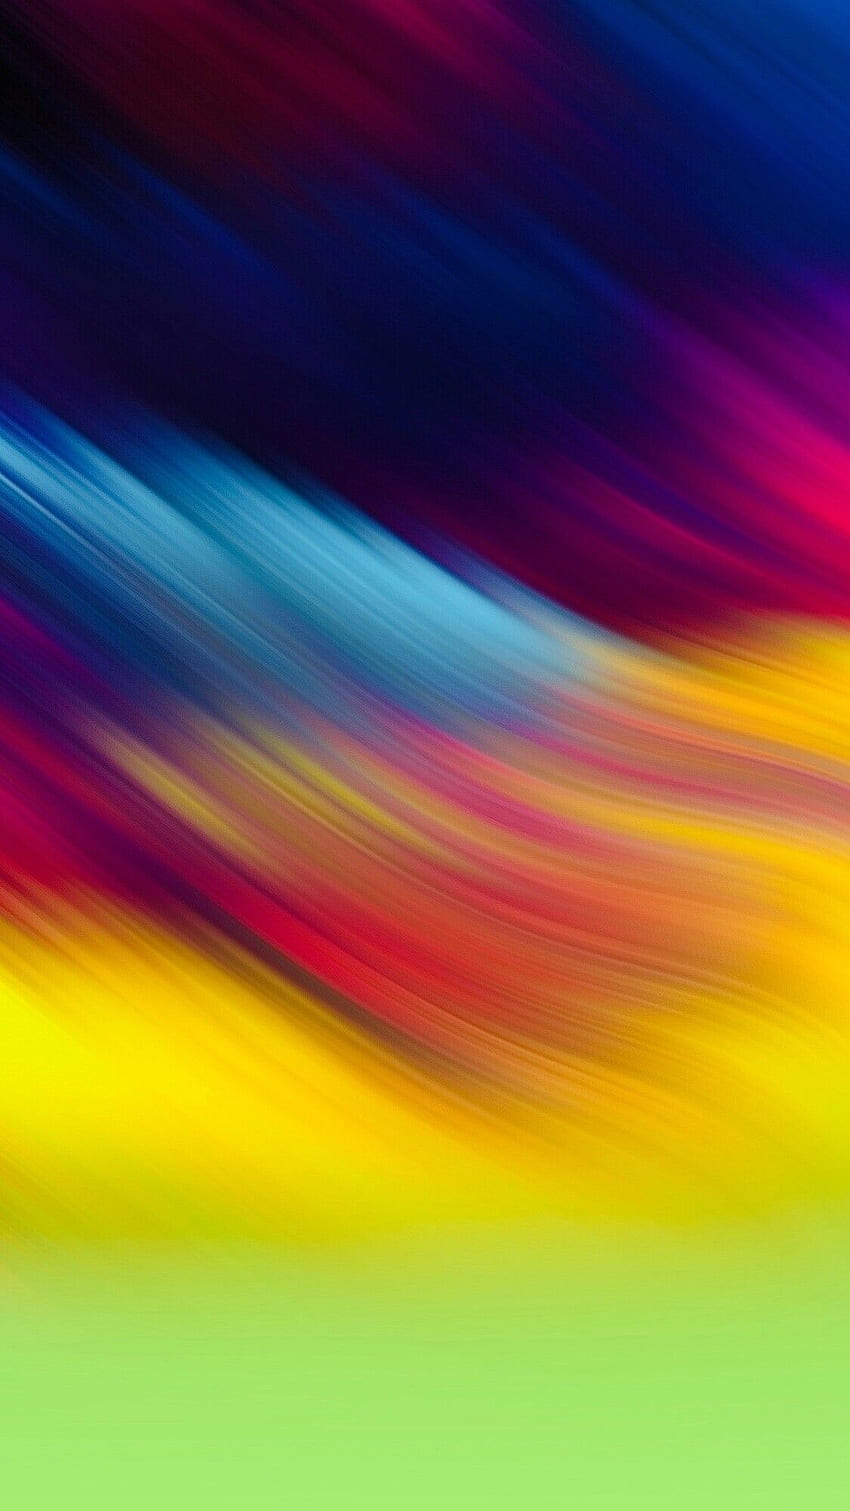 For The Colorful: Create iOS 7 Wallpapers From an iPhone or iPad -  MacStories